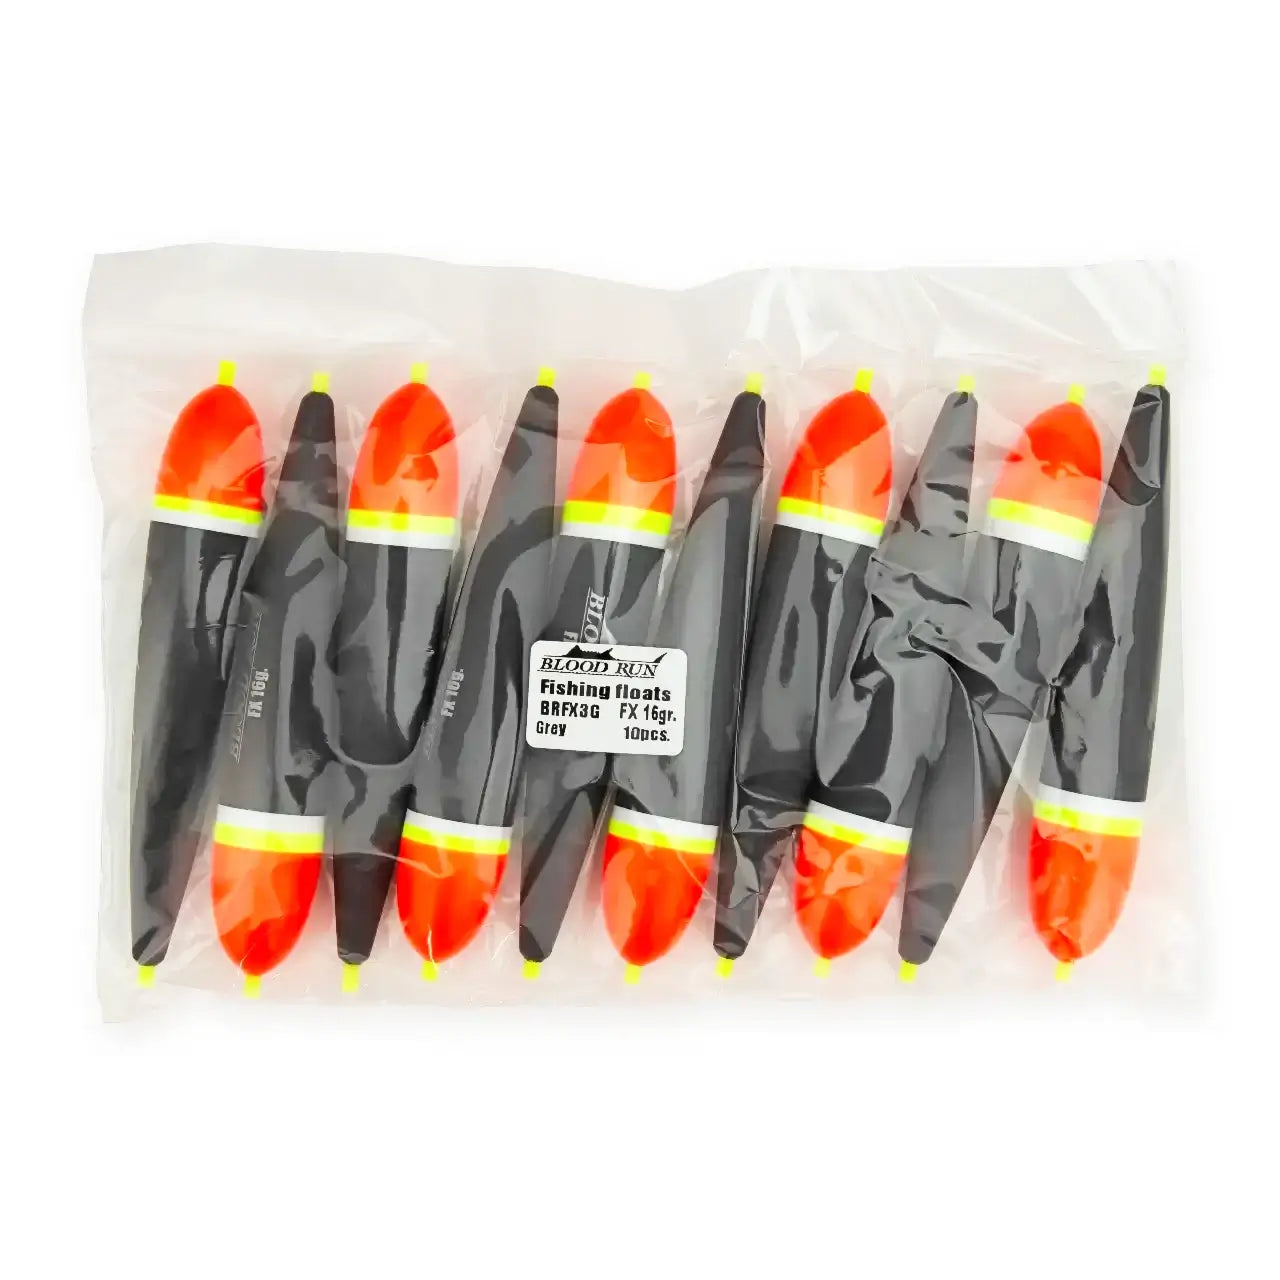 10 Pack Balsa Fishing Floats for Steelhead and Salmon from Blood